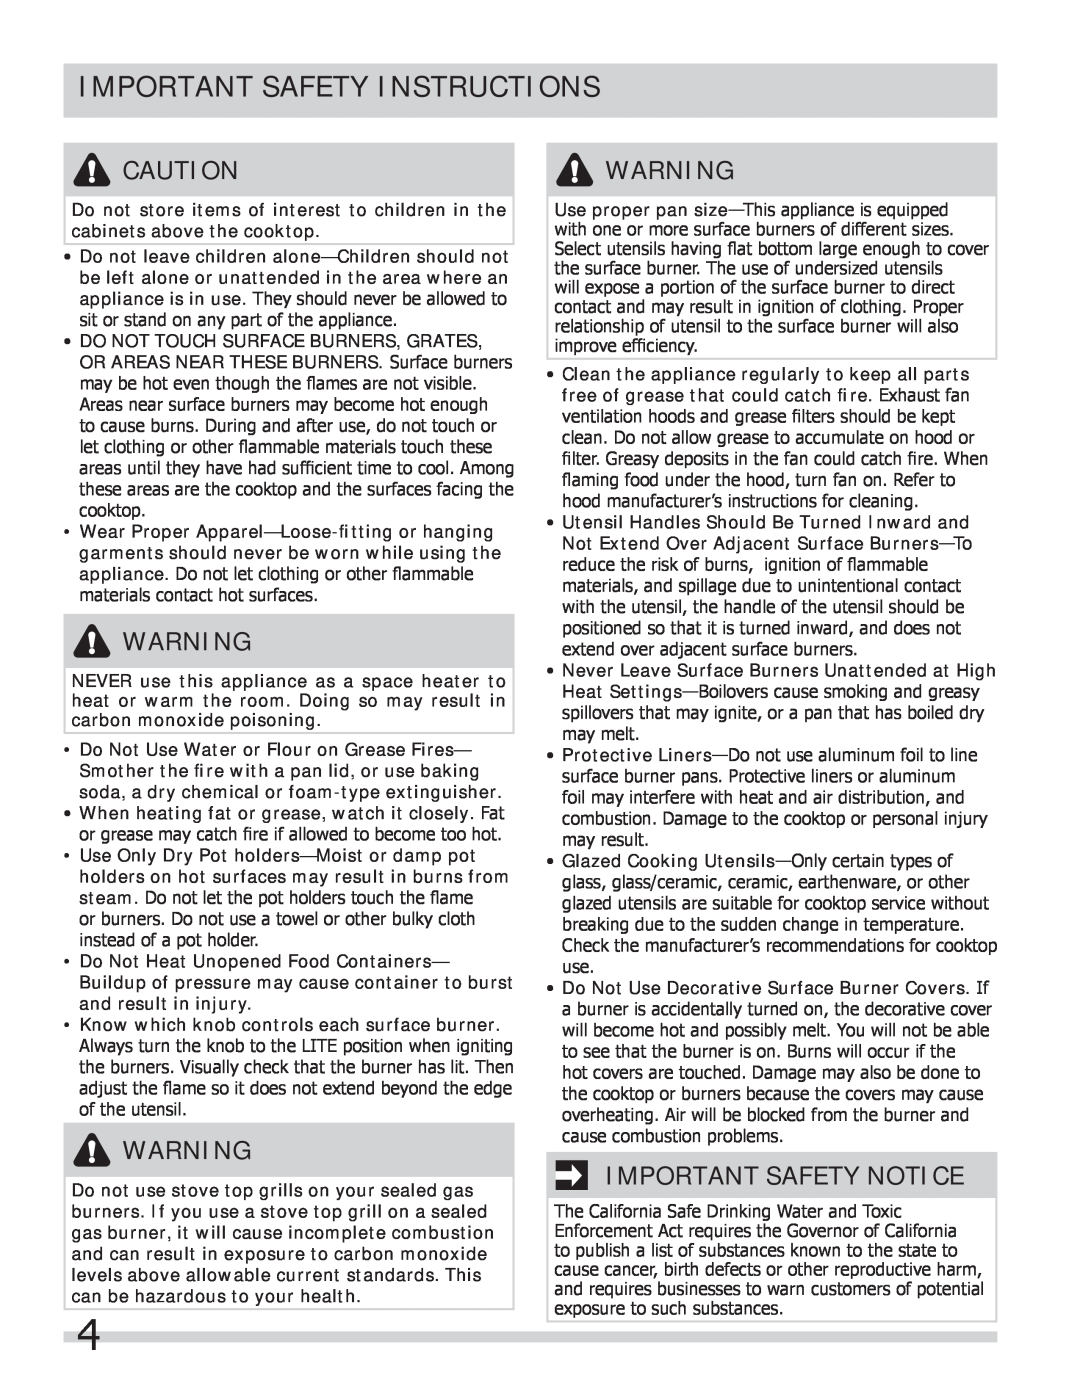 Frigidaire FPGC3087MS important safety instructions Important Safety Notice, Important Safety Instructions 